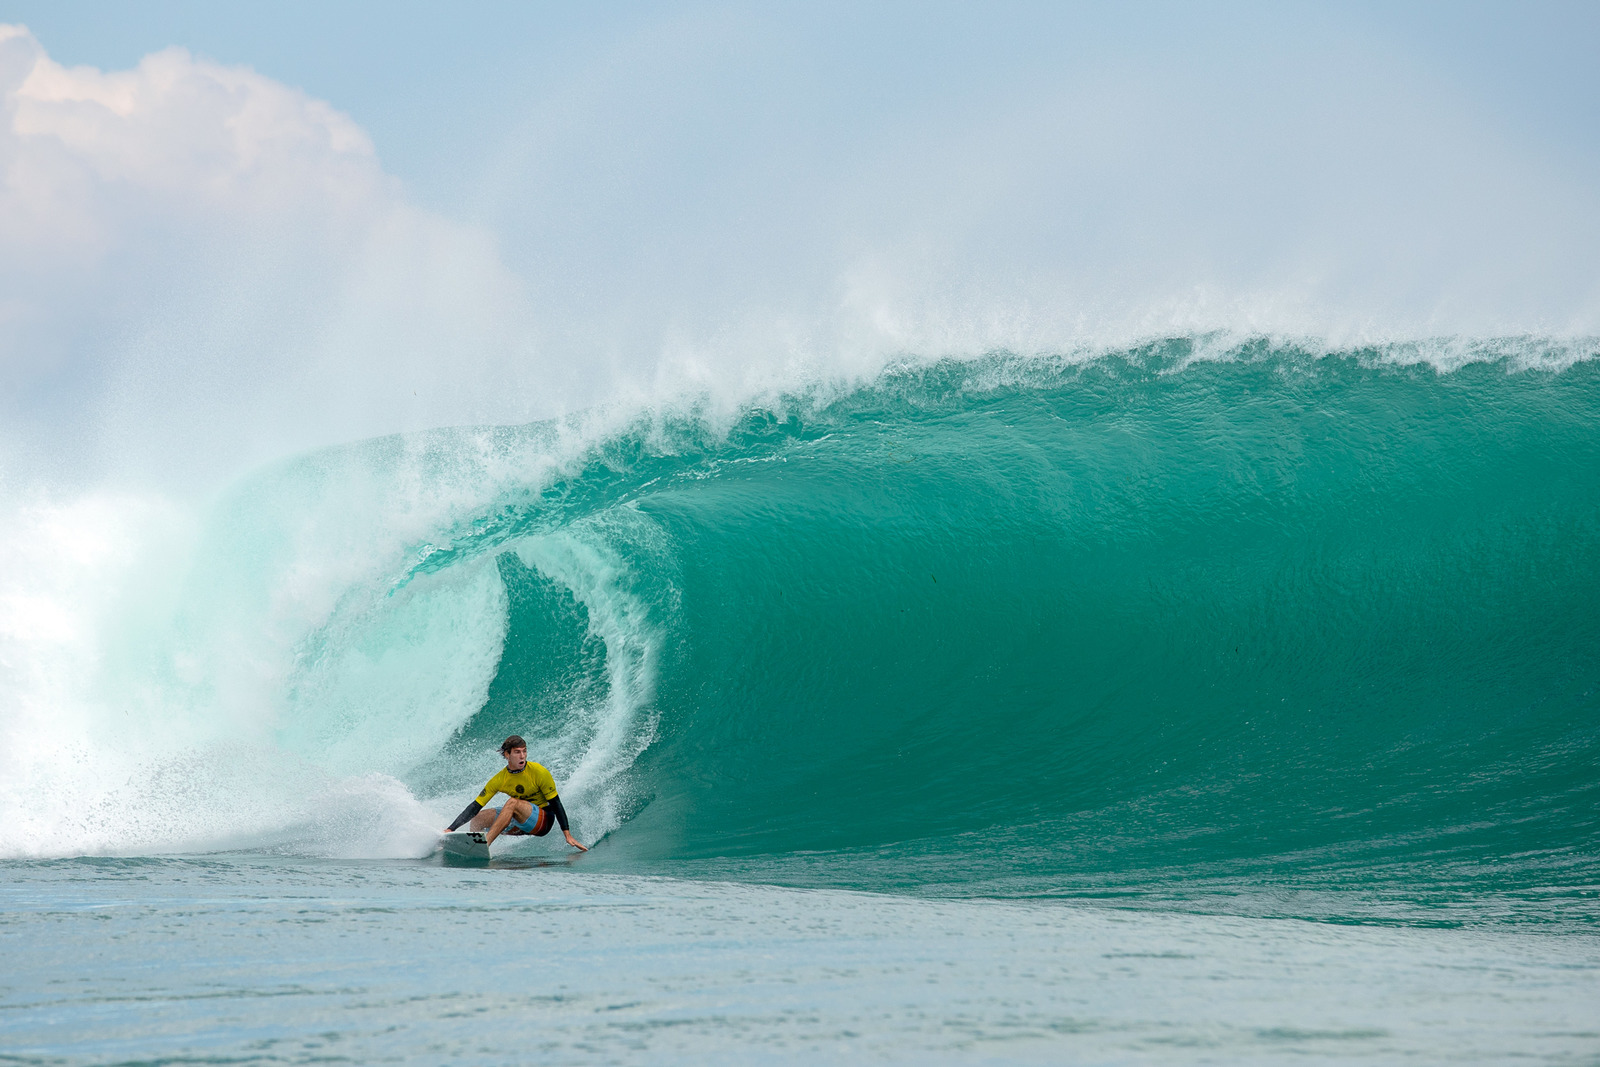 Jack Robinson coming through at the final round of the Rip Curl Cup at Padang Padang in 2018. Photo: Lawrence/WSL